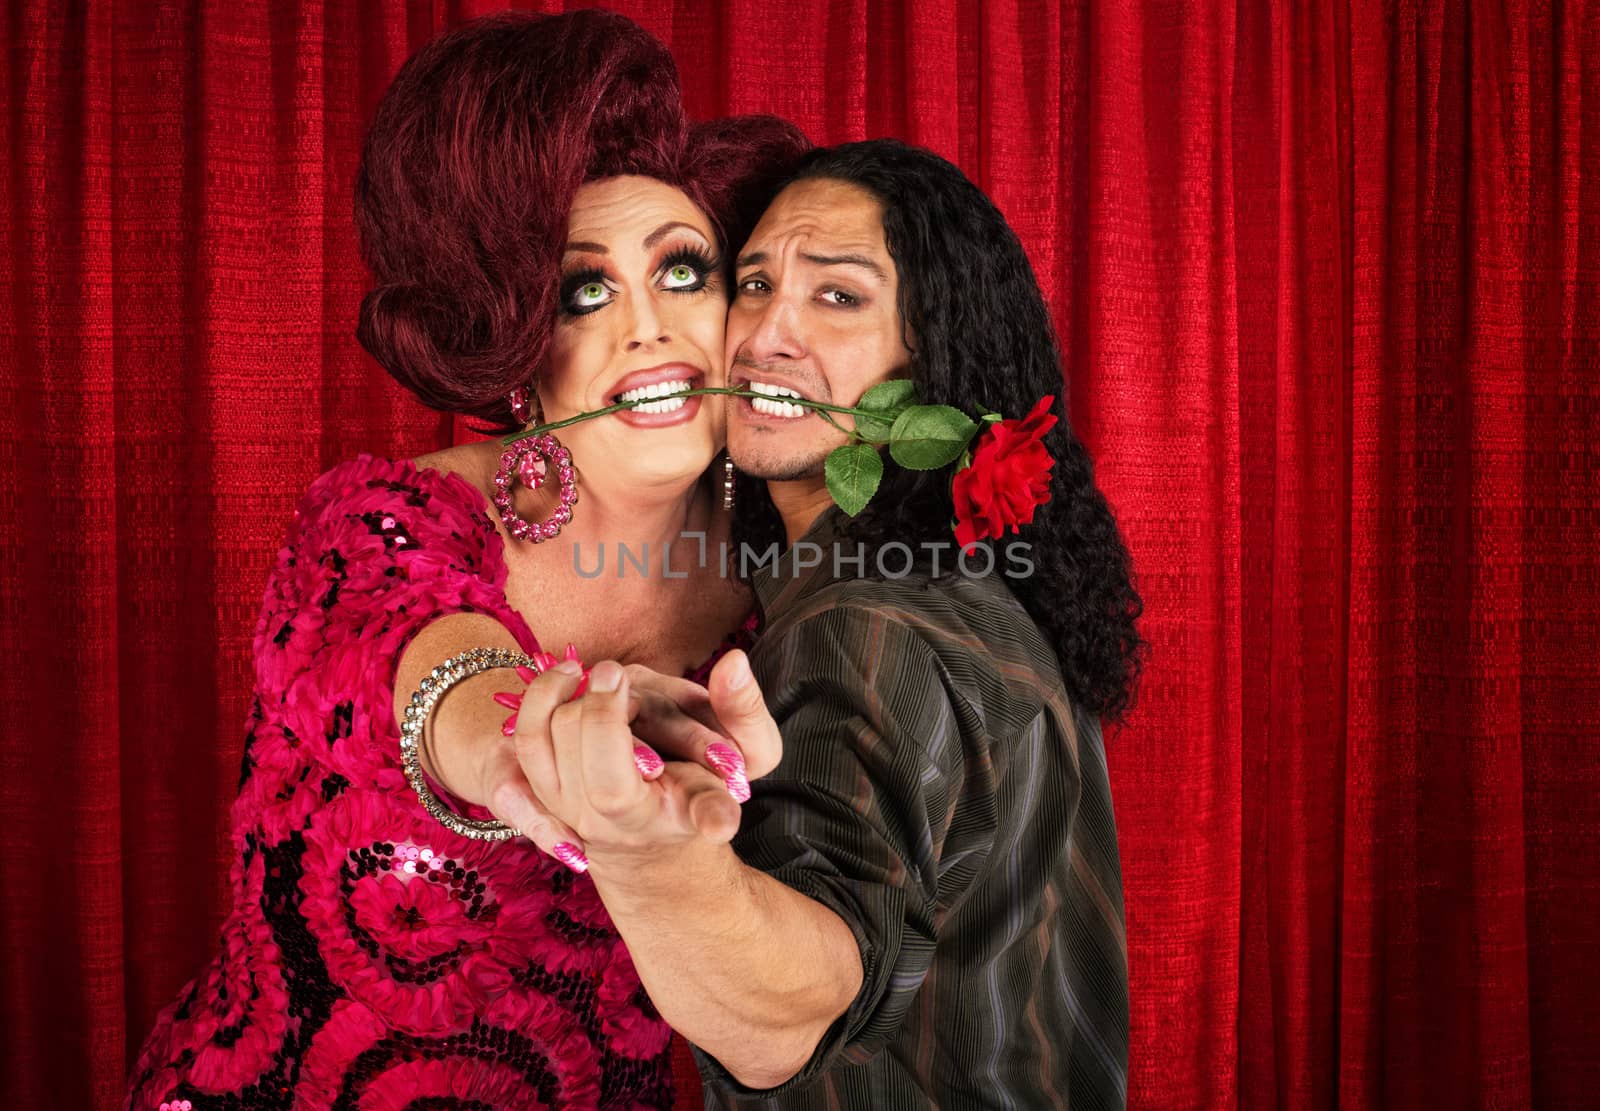 Embarrassed Man Dancing with Transvestite by Creatista